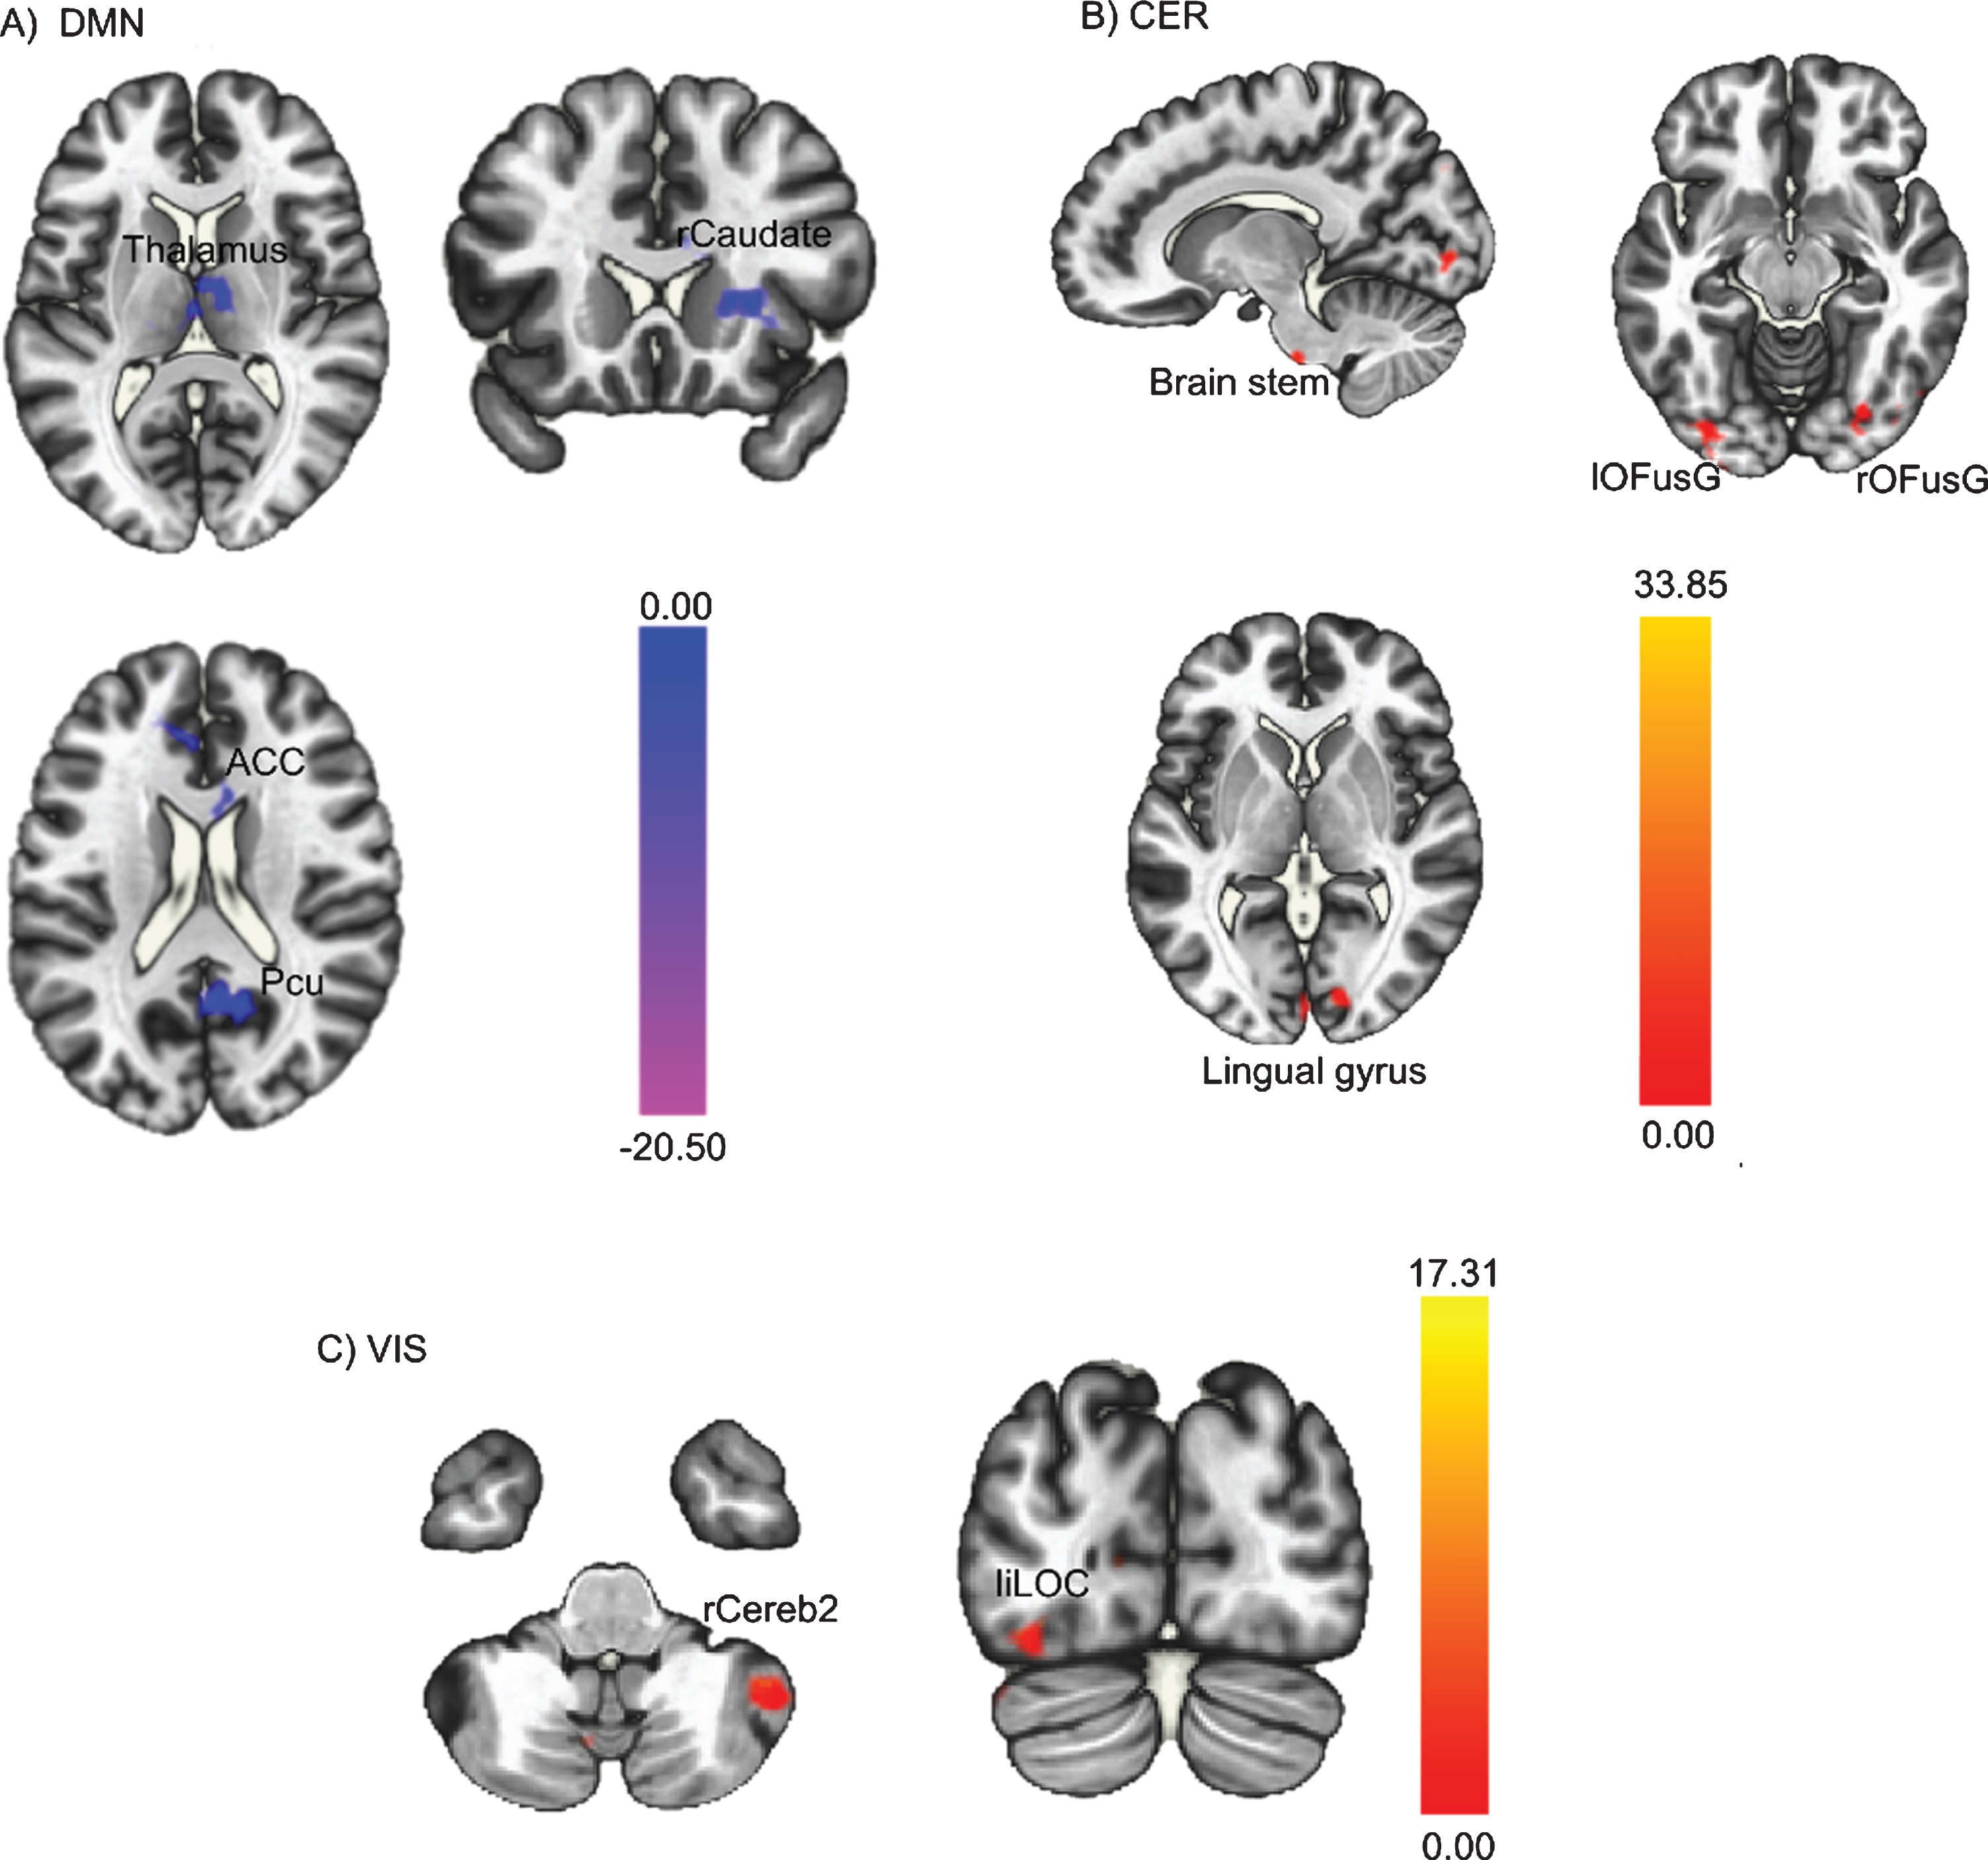 Whole-brain level paired sample t-test results of FC differences between pre- and post-intervention. Red regions indicated increased FC after the PA-intervention and blue regions indicated decreased FC after the PA-intervention. (A) Decreased DMN FC; (B) Increased CER FC; (C) Increased VIS FC. The threshold was set as uncorrected p < 0.01 at the whole brain level, and reported regions survived at pFDR < 0.05 at the cluster level. FC = functional connectivity; PA = physical activity; DMN = posterior default mode network; CER = cerebellar network; VIS = visual network.